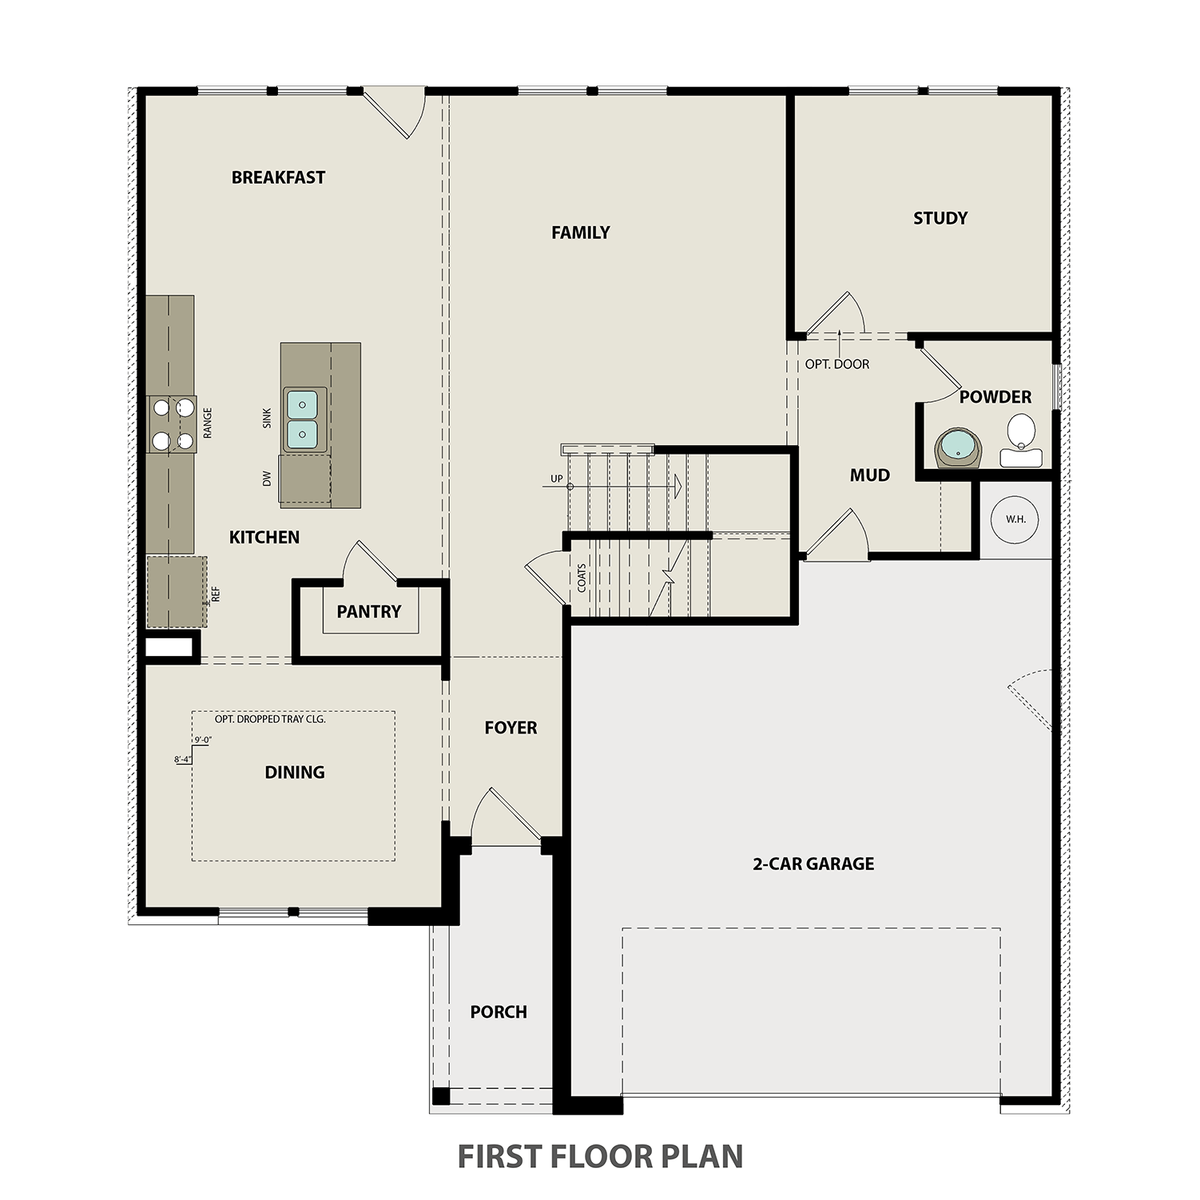 1 - The Willow C floor plan layout for 153 Cavalcade Loop in Davidson Homes' Carellton community.